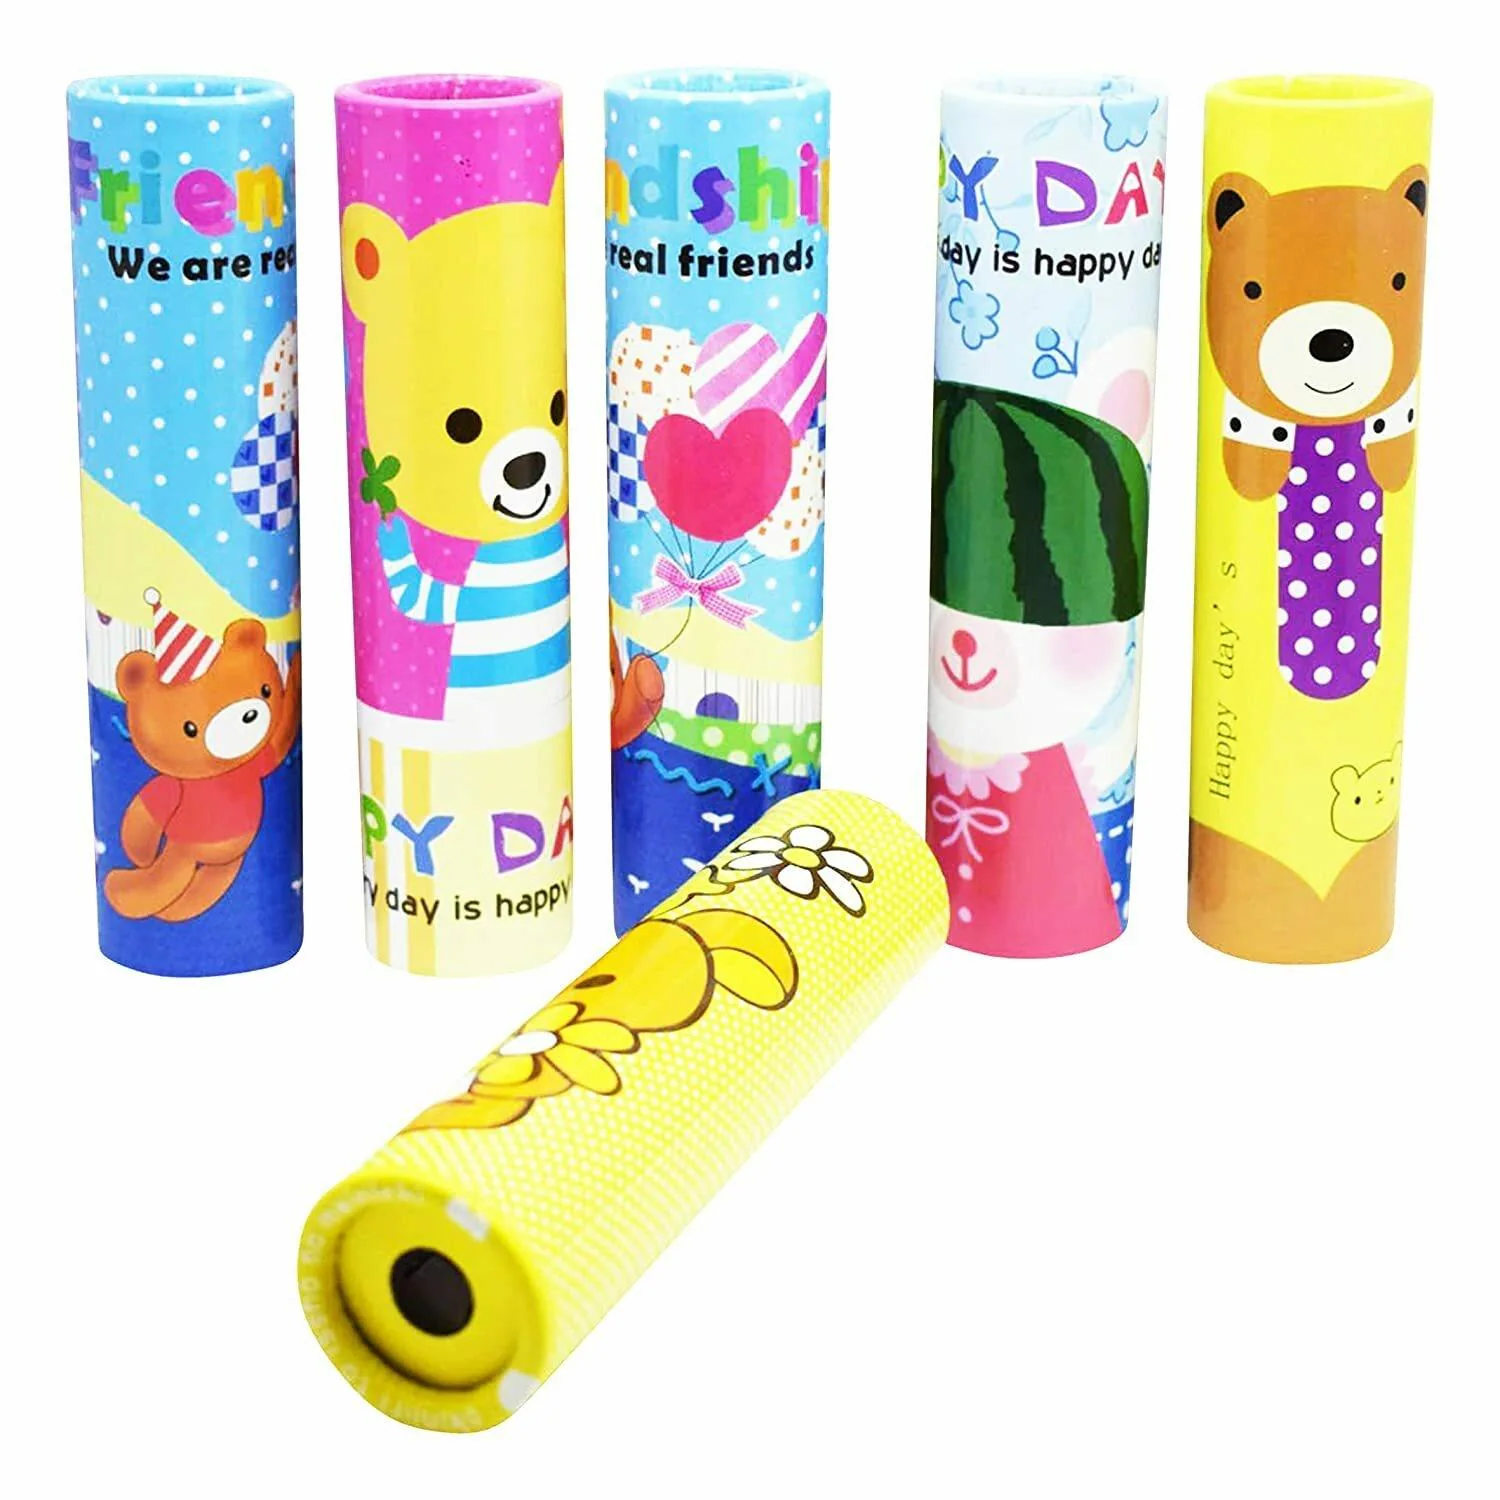 Rotating Magical Kaleidoscope Optical Toy for Kids Children Party Favors 